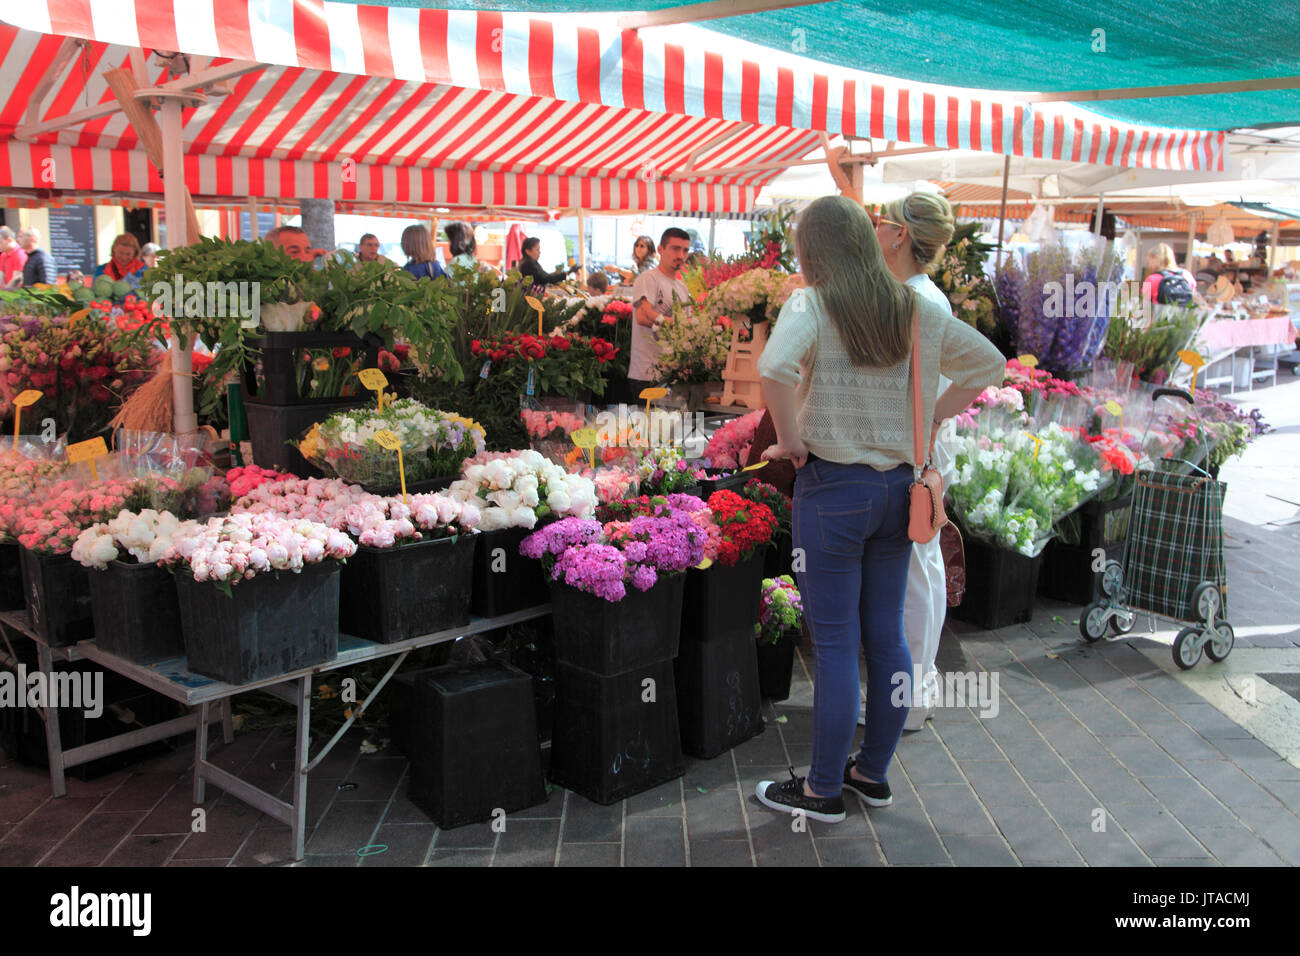 Flower Market, Cours Saleya, Old Town, Nice, Alpes Maritimes, Provence, Cote d'Azur, French Riviera, France, Europe Stock Photo